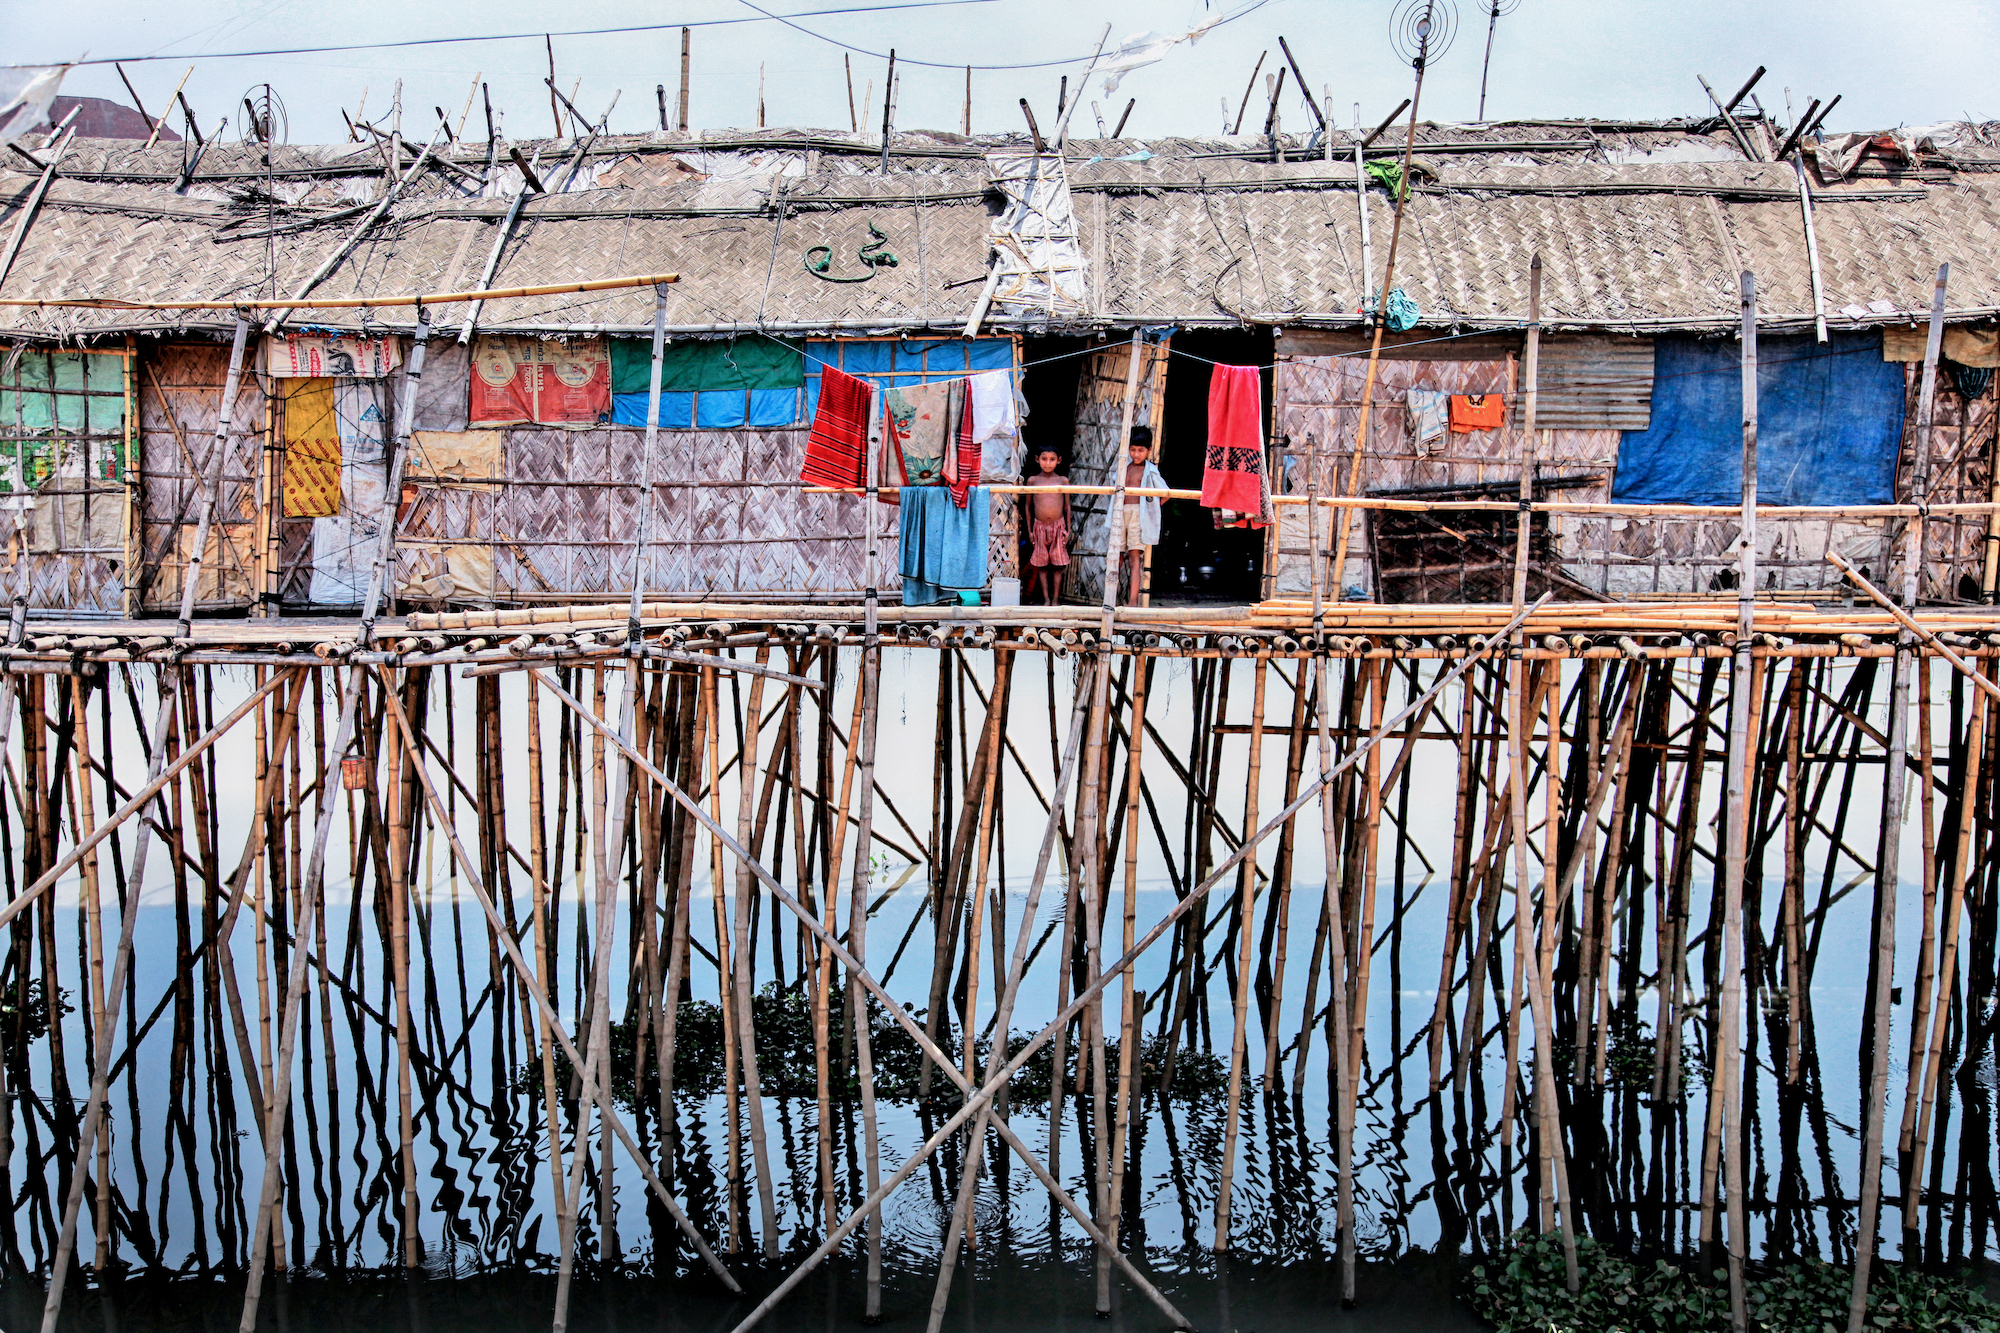 Houses on stilts in a river in Bangladesh